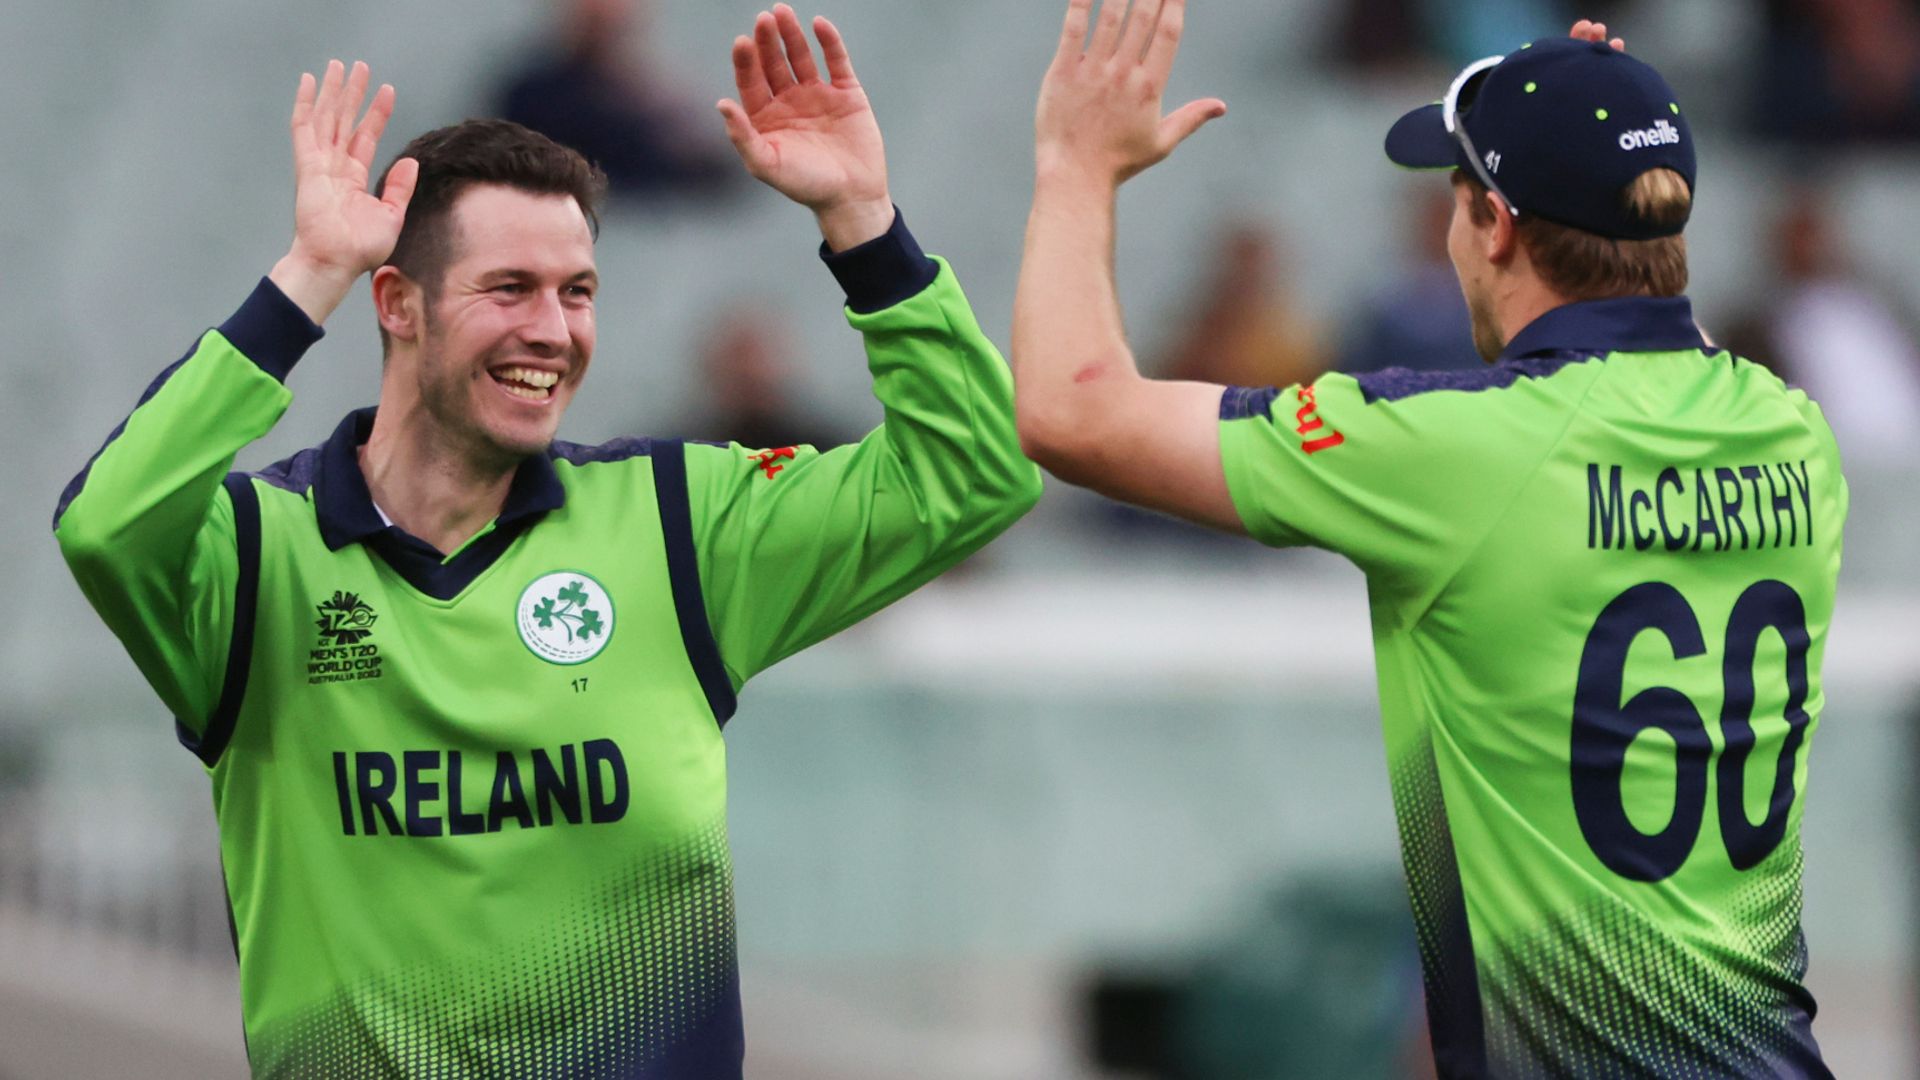 Ireland earn one of their greatest results | 'Amazing and emotional'